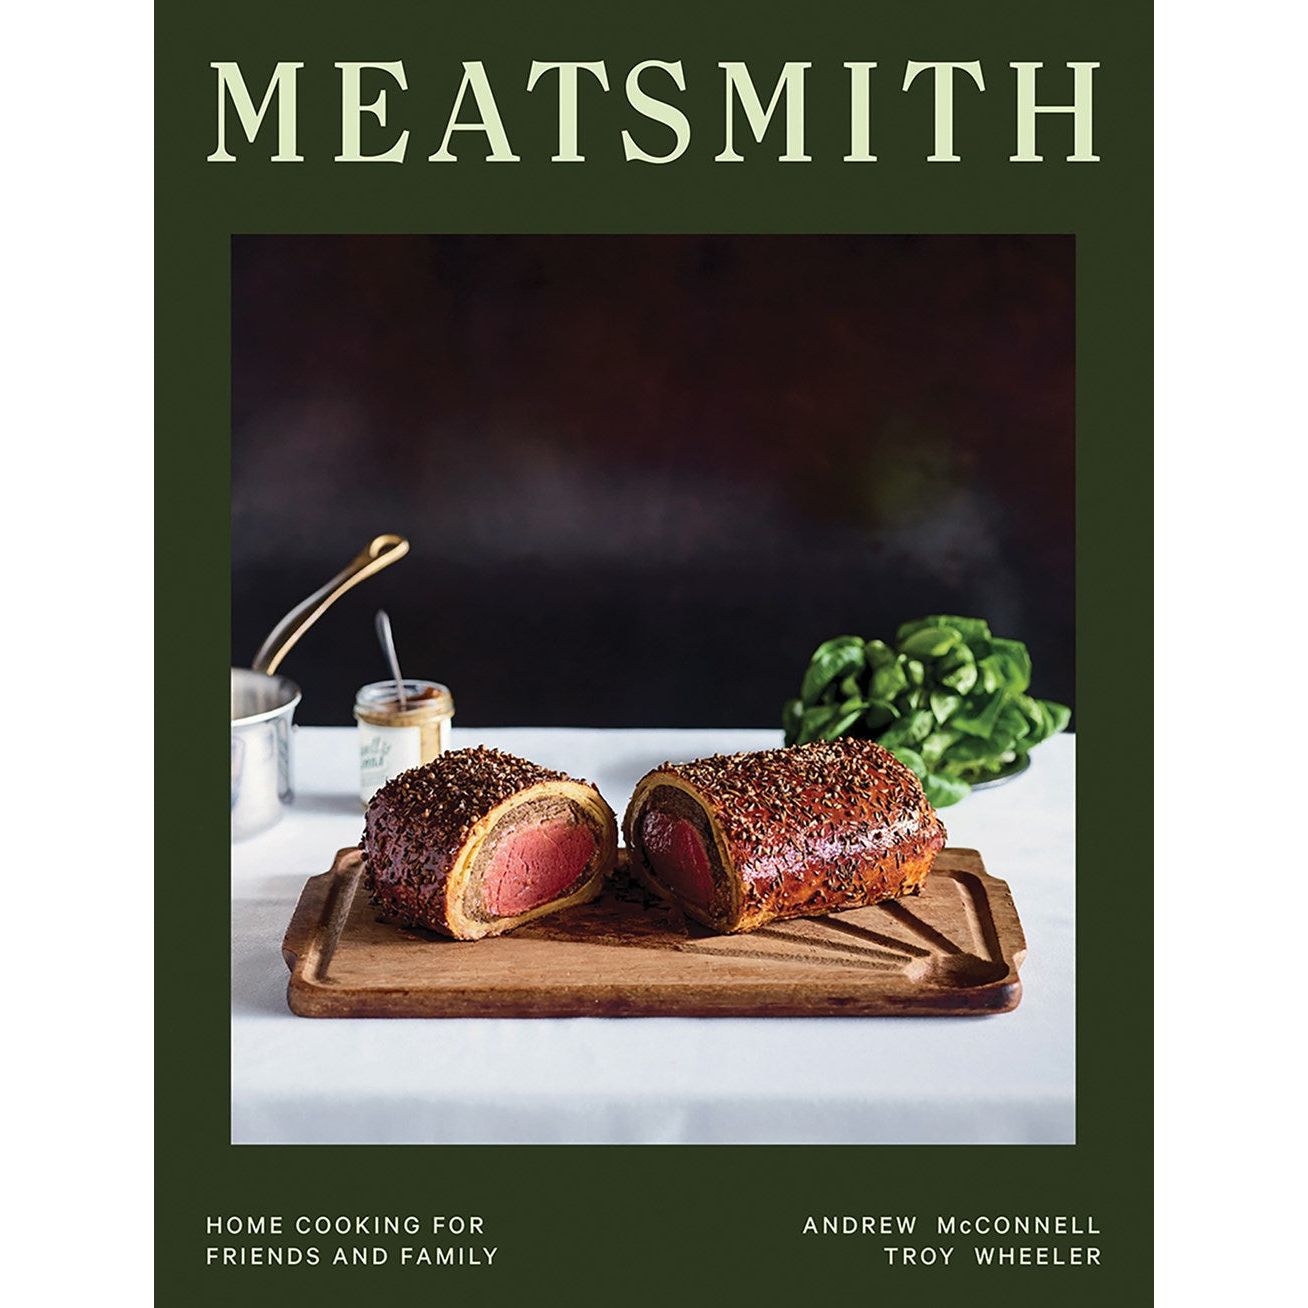 Meatsmith (Andrew McConnell, Troy Wheeler)